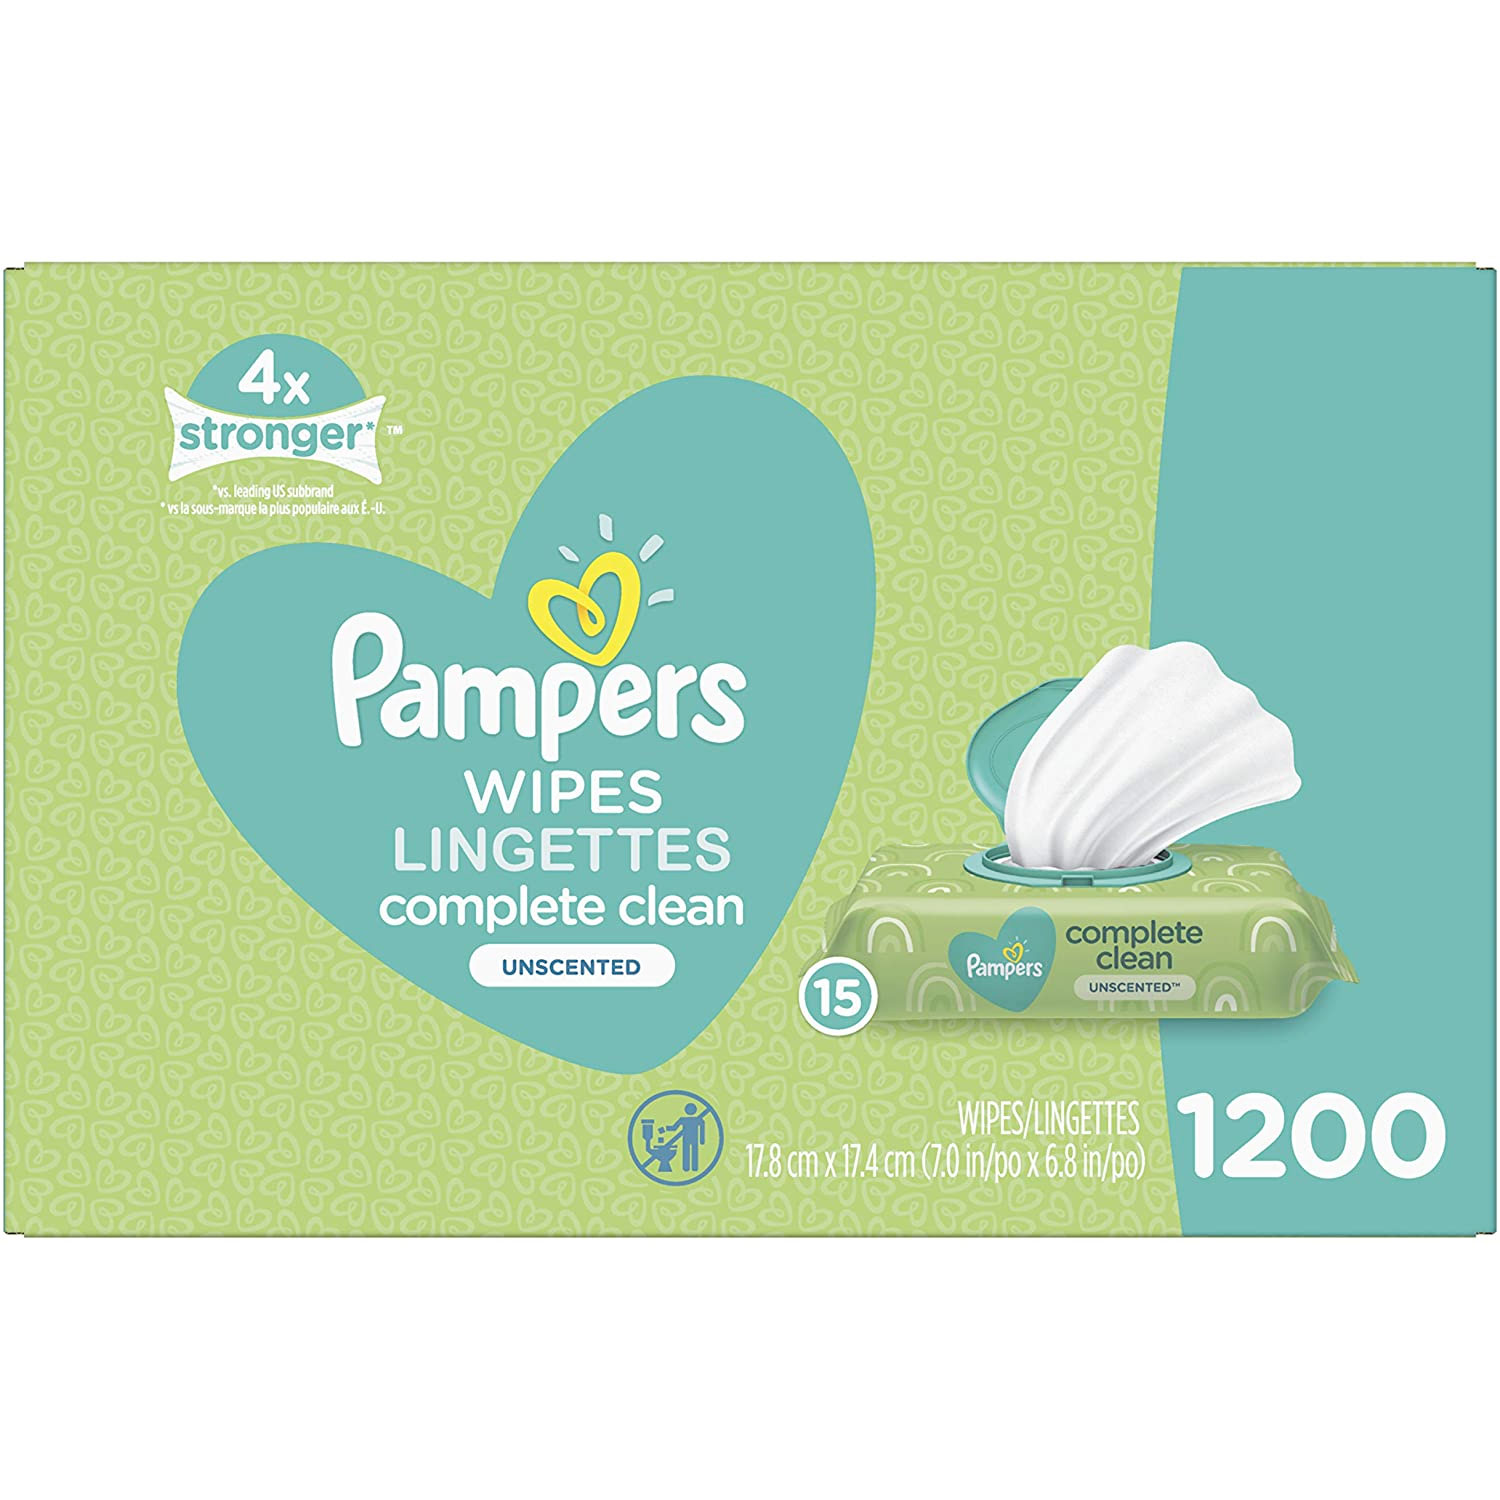 Amazon：Pampers Baby Wipes (1200 Count)只卖$20.99